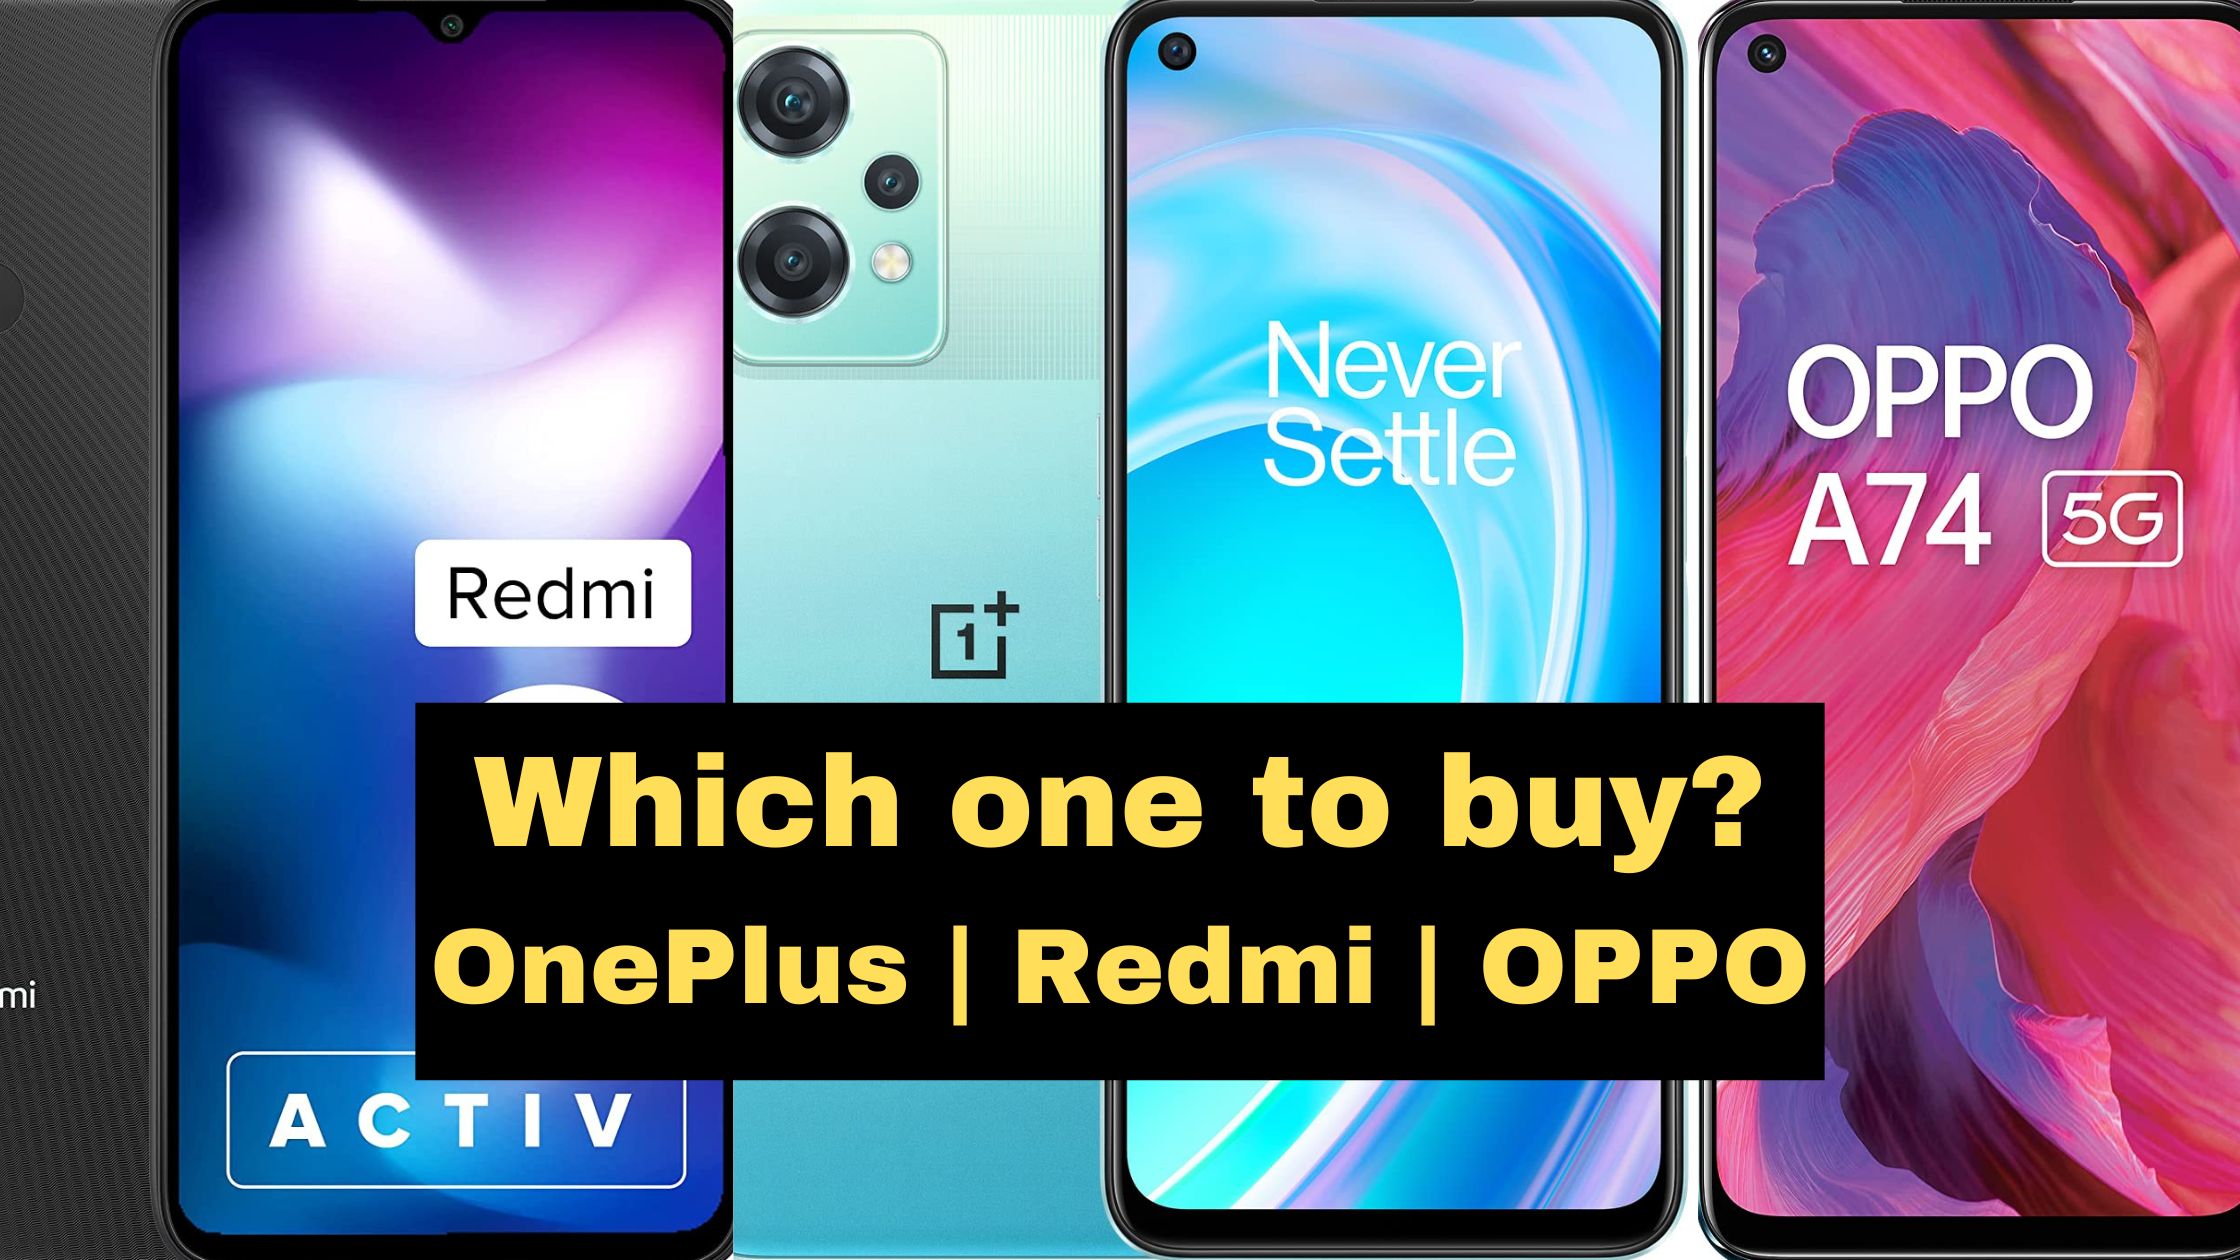 compare OnePlus with Redmi with OPPO